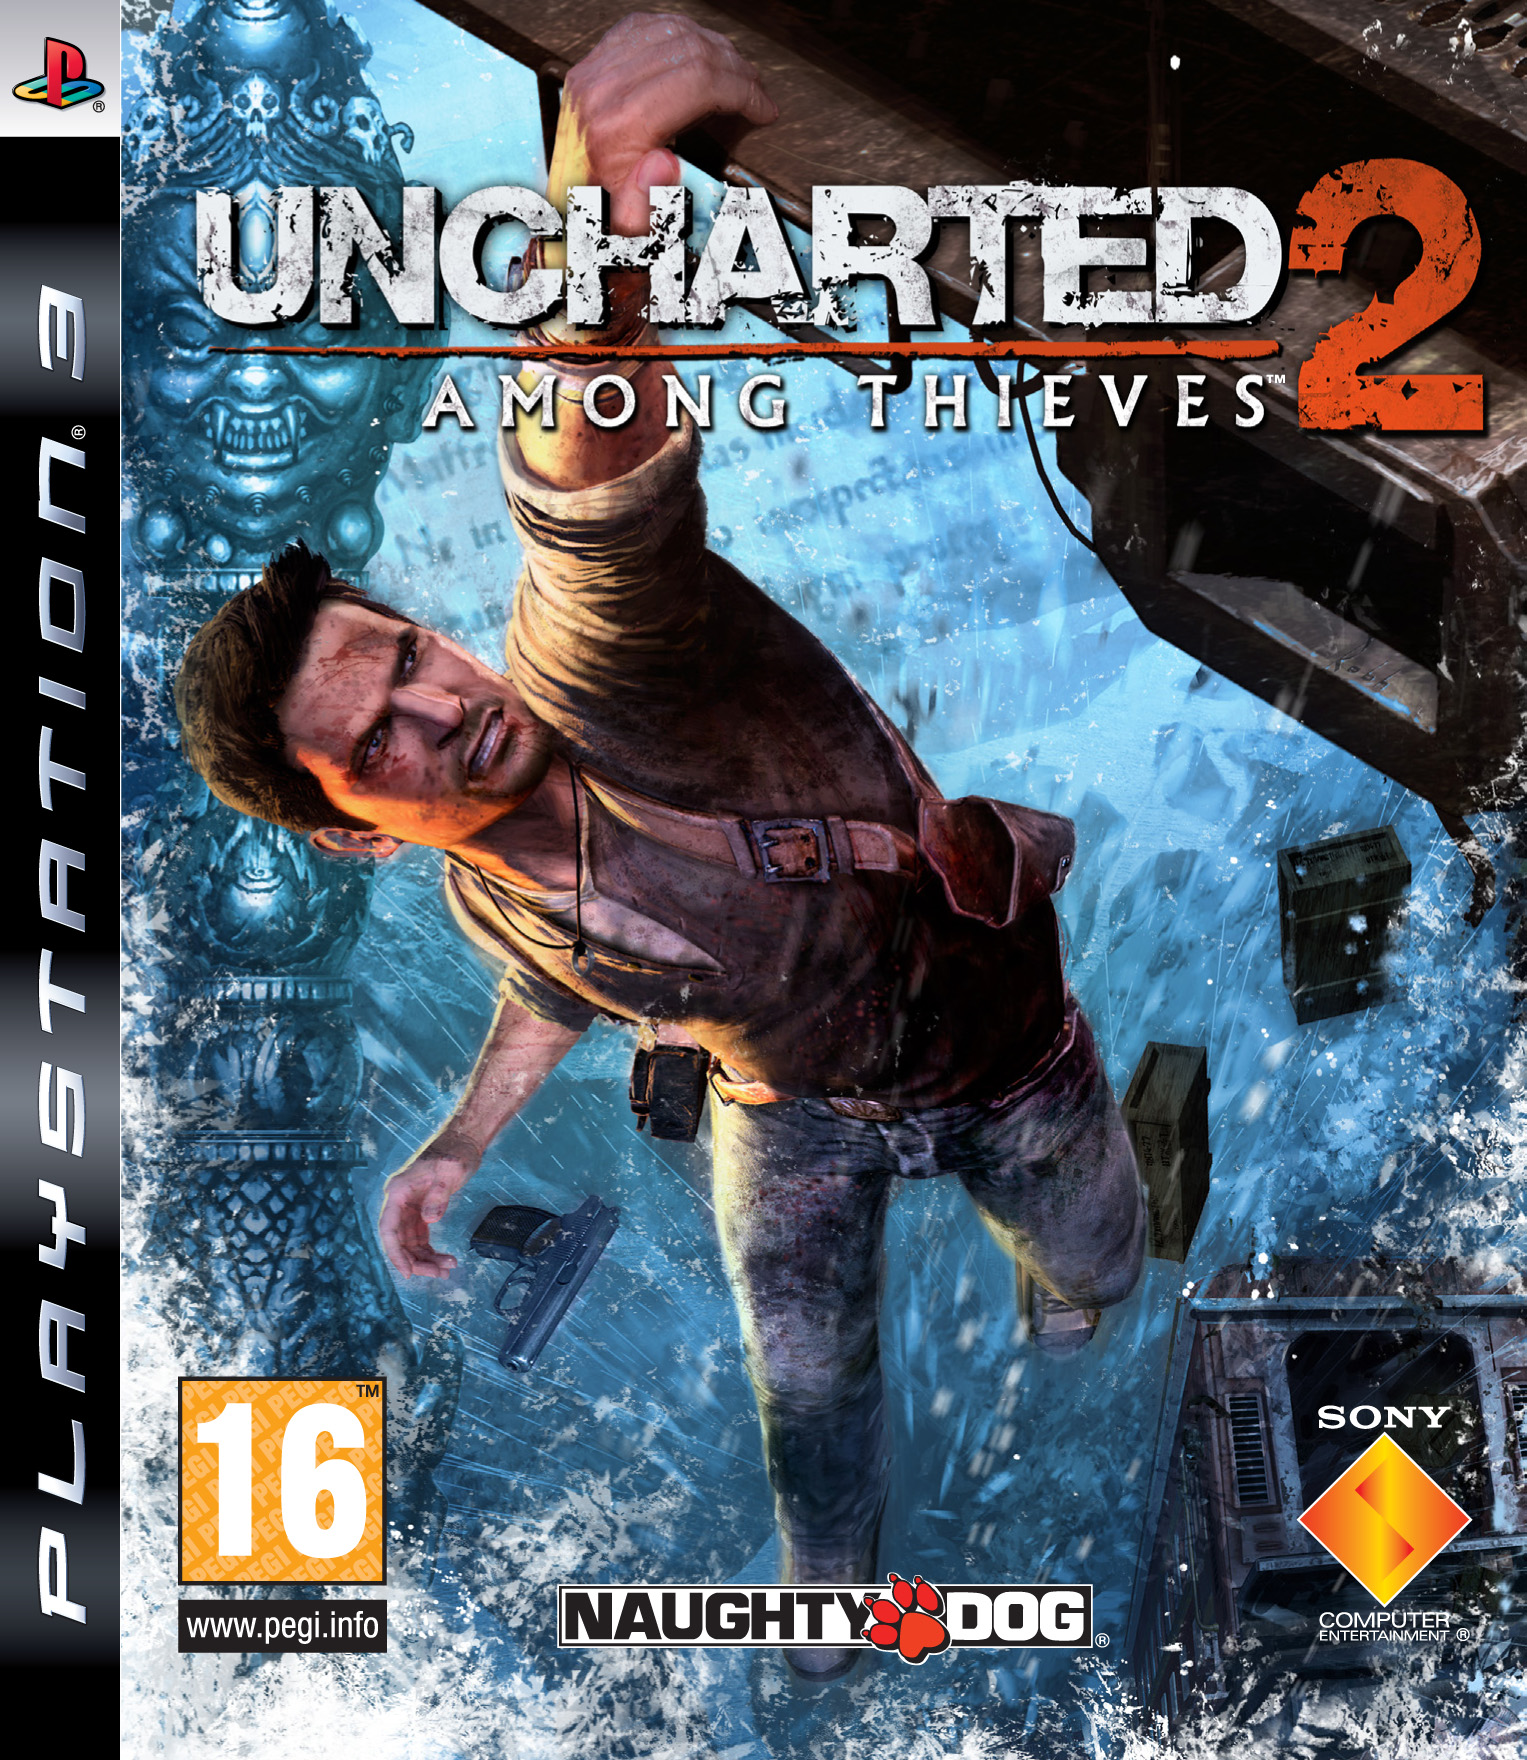 uncharted 2 pc key